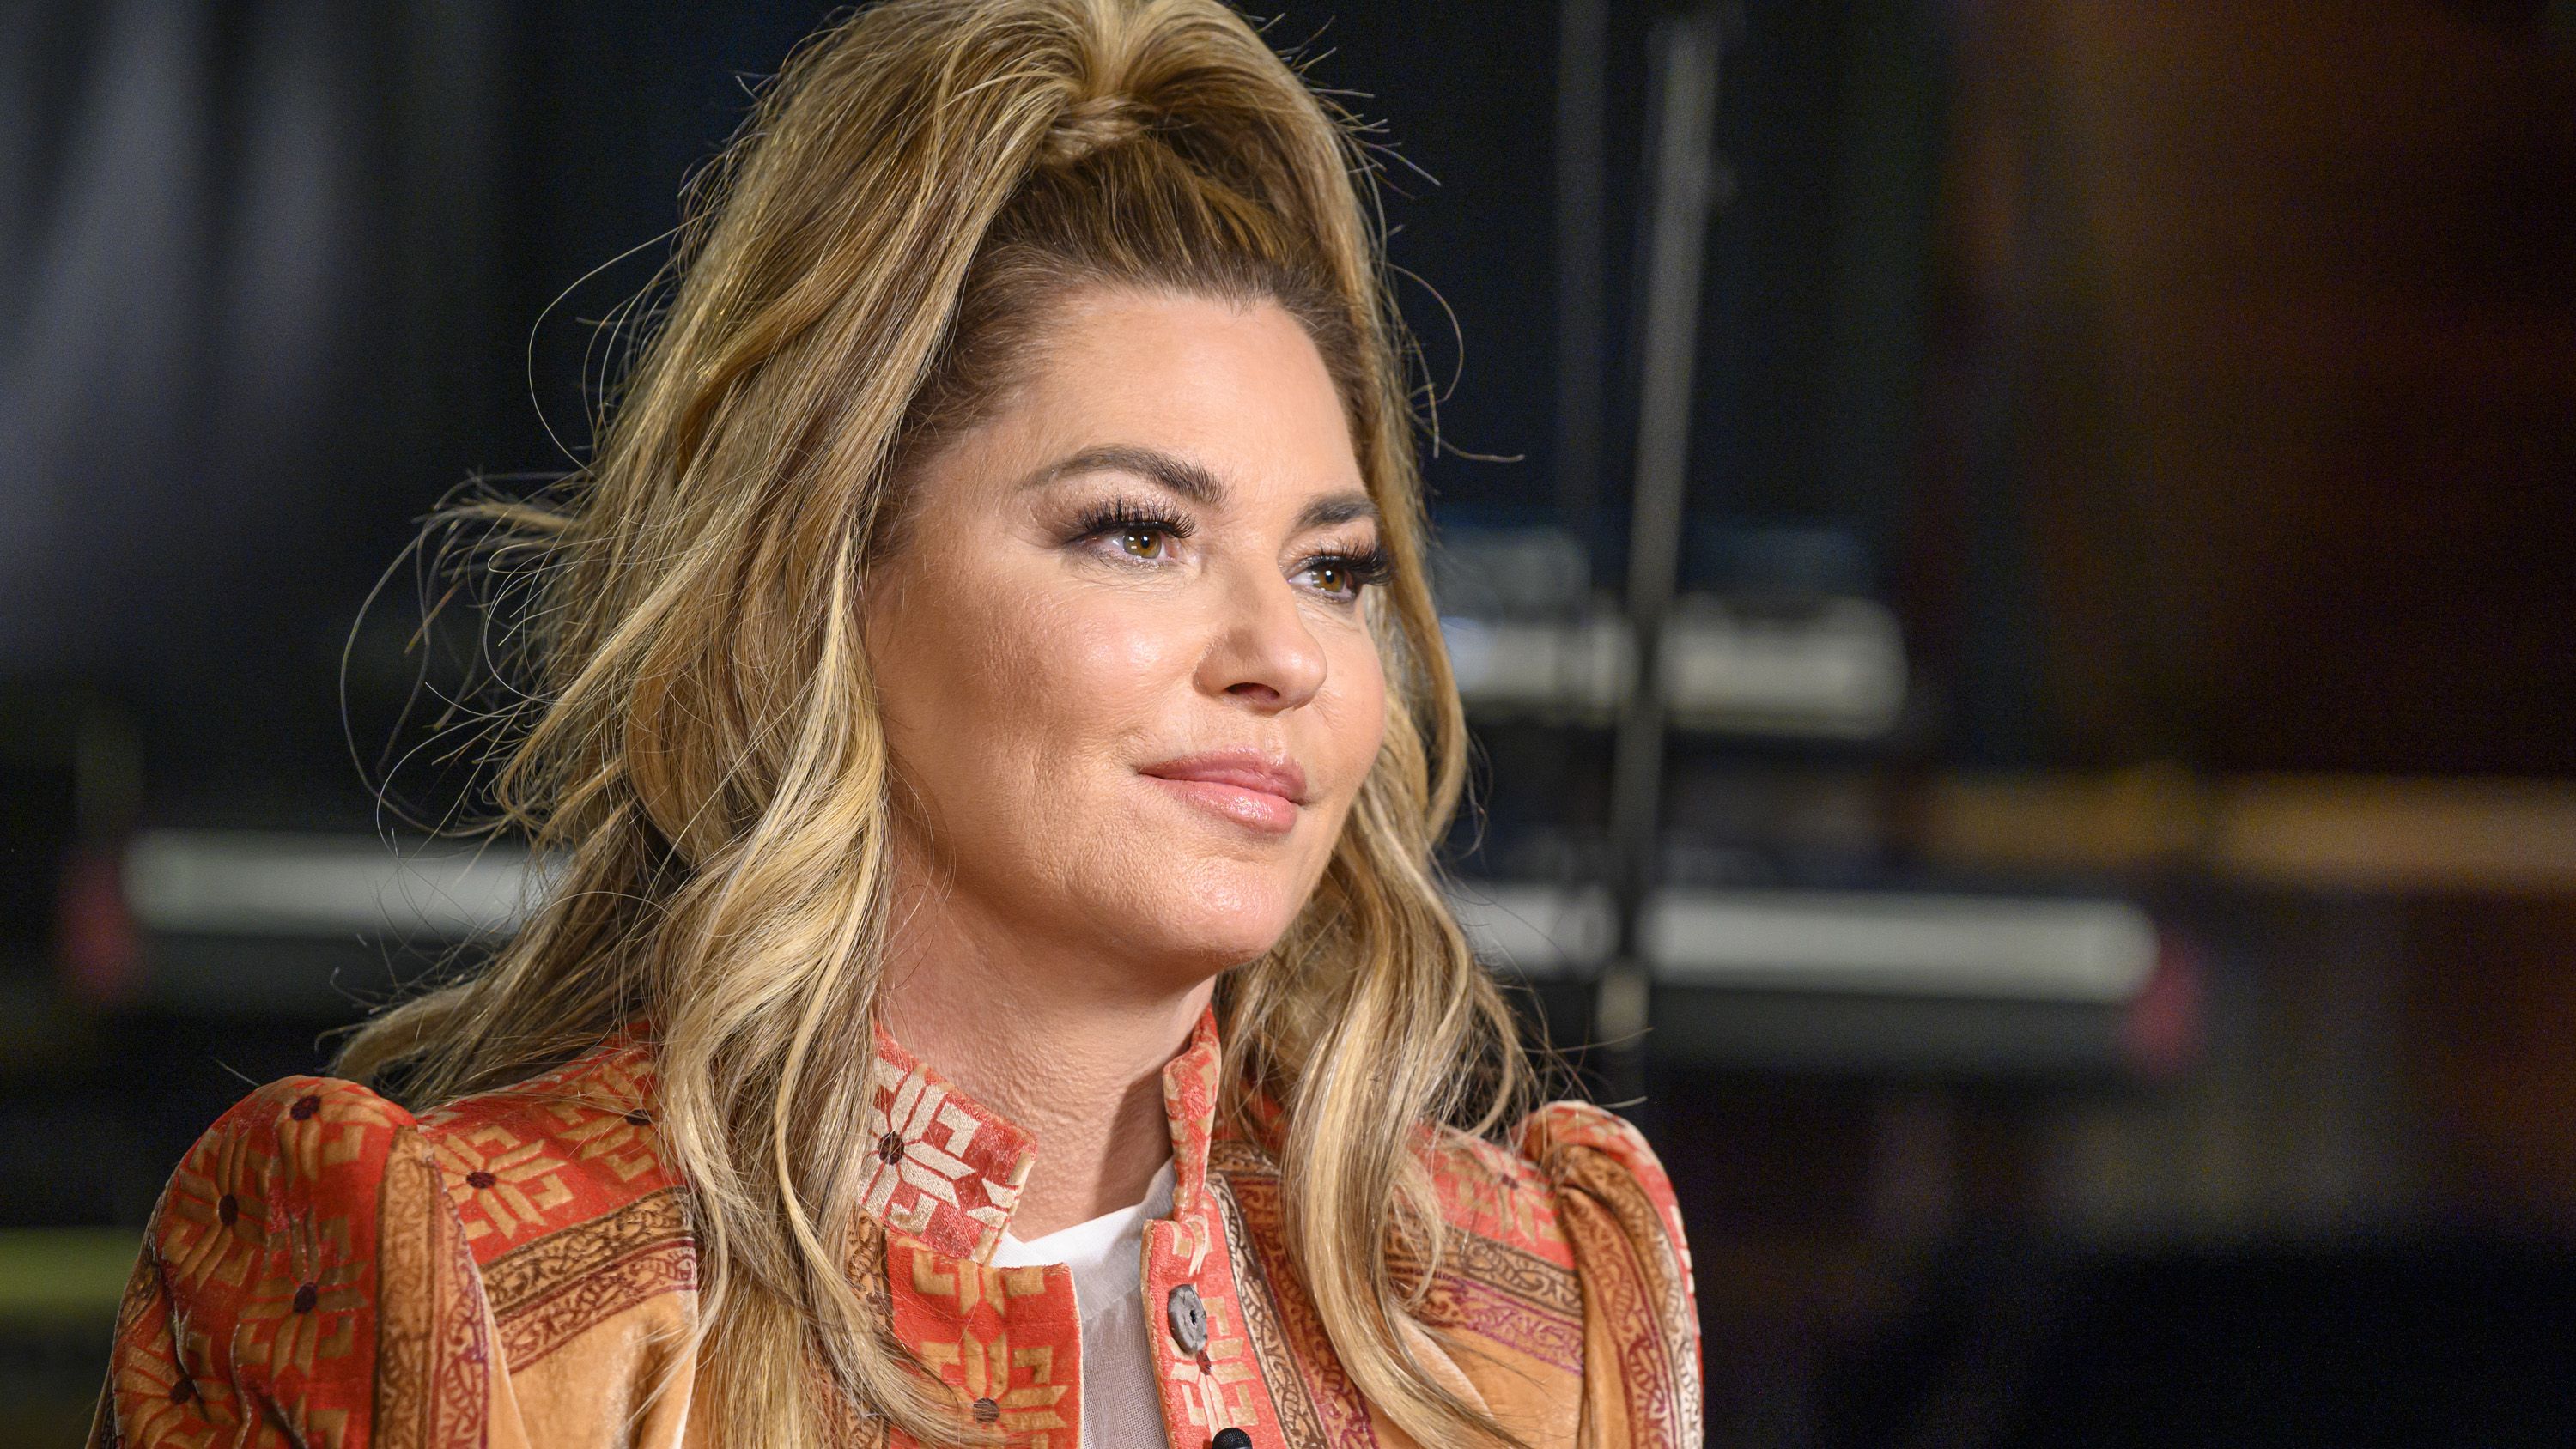 Shania Twain Speaks Out About Falling